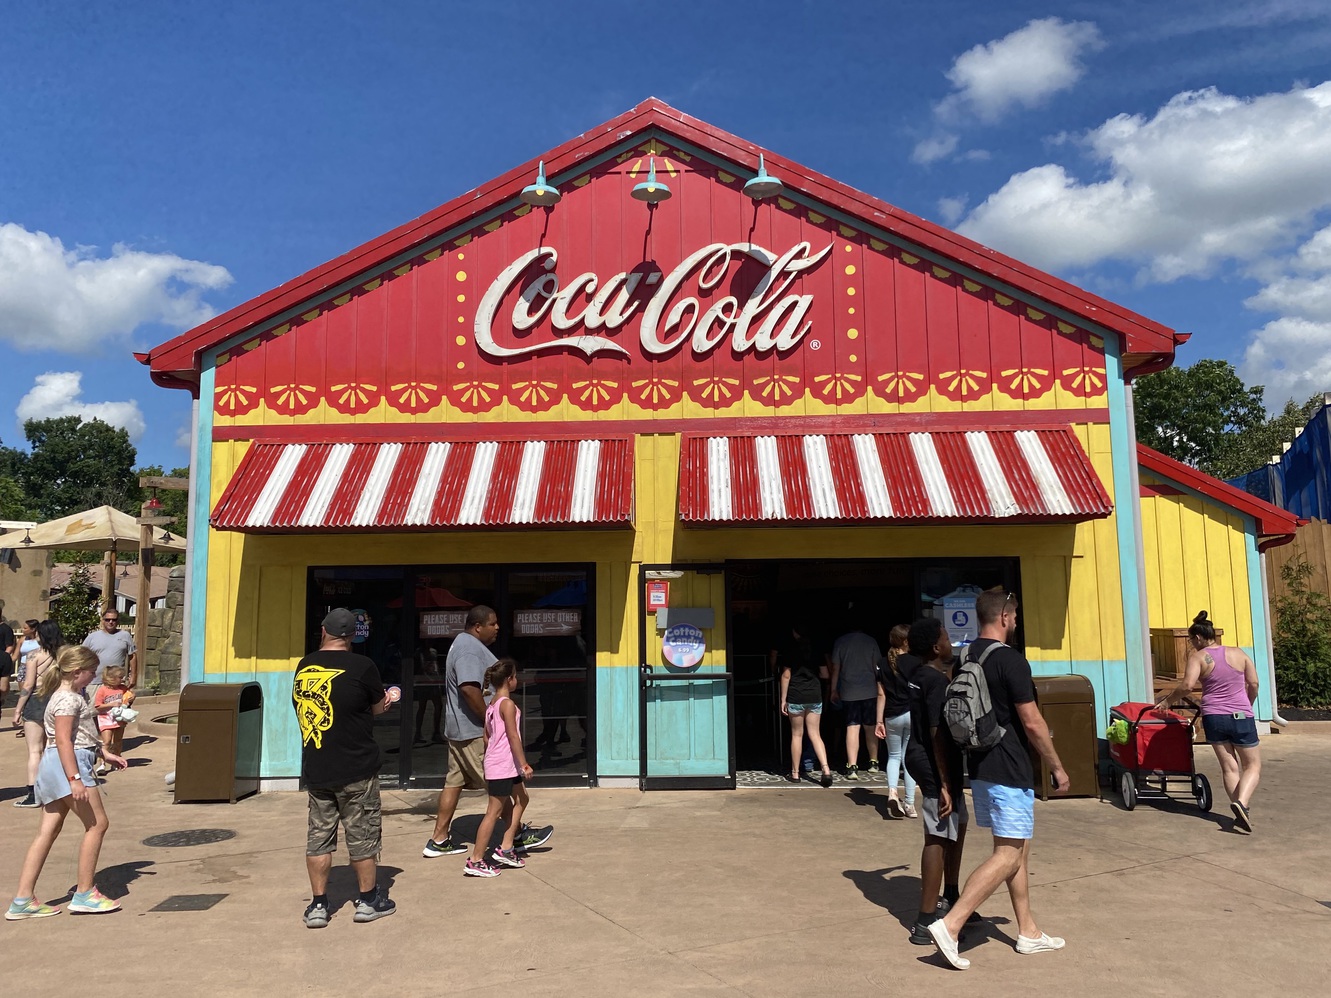 This
      is the big Coca Cola drink stand in Adventure Port.